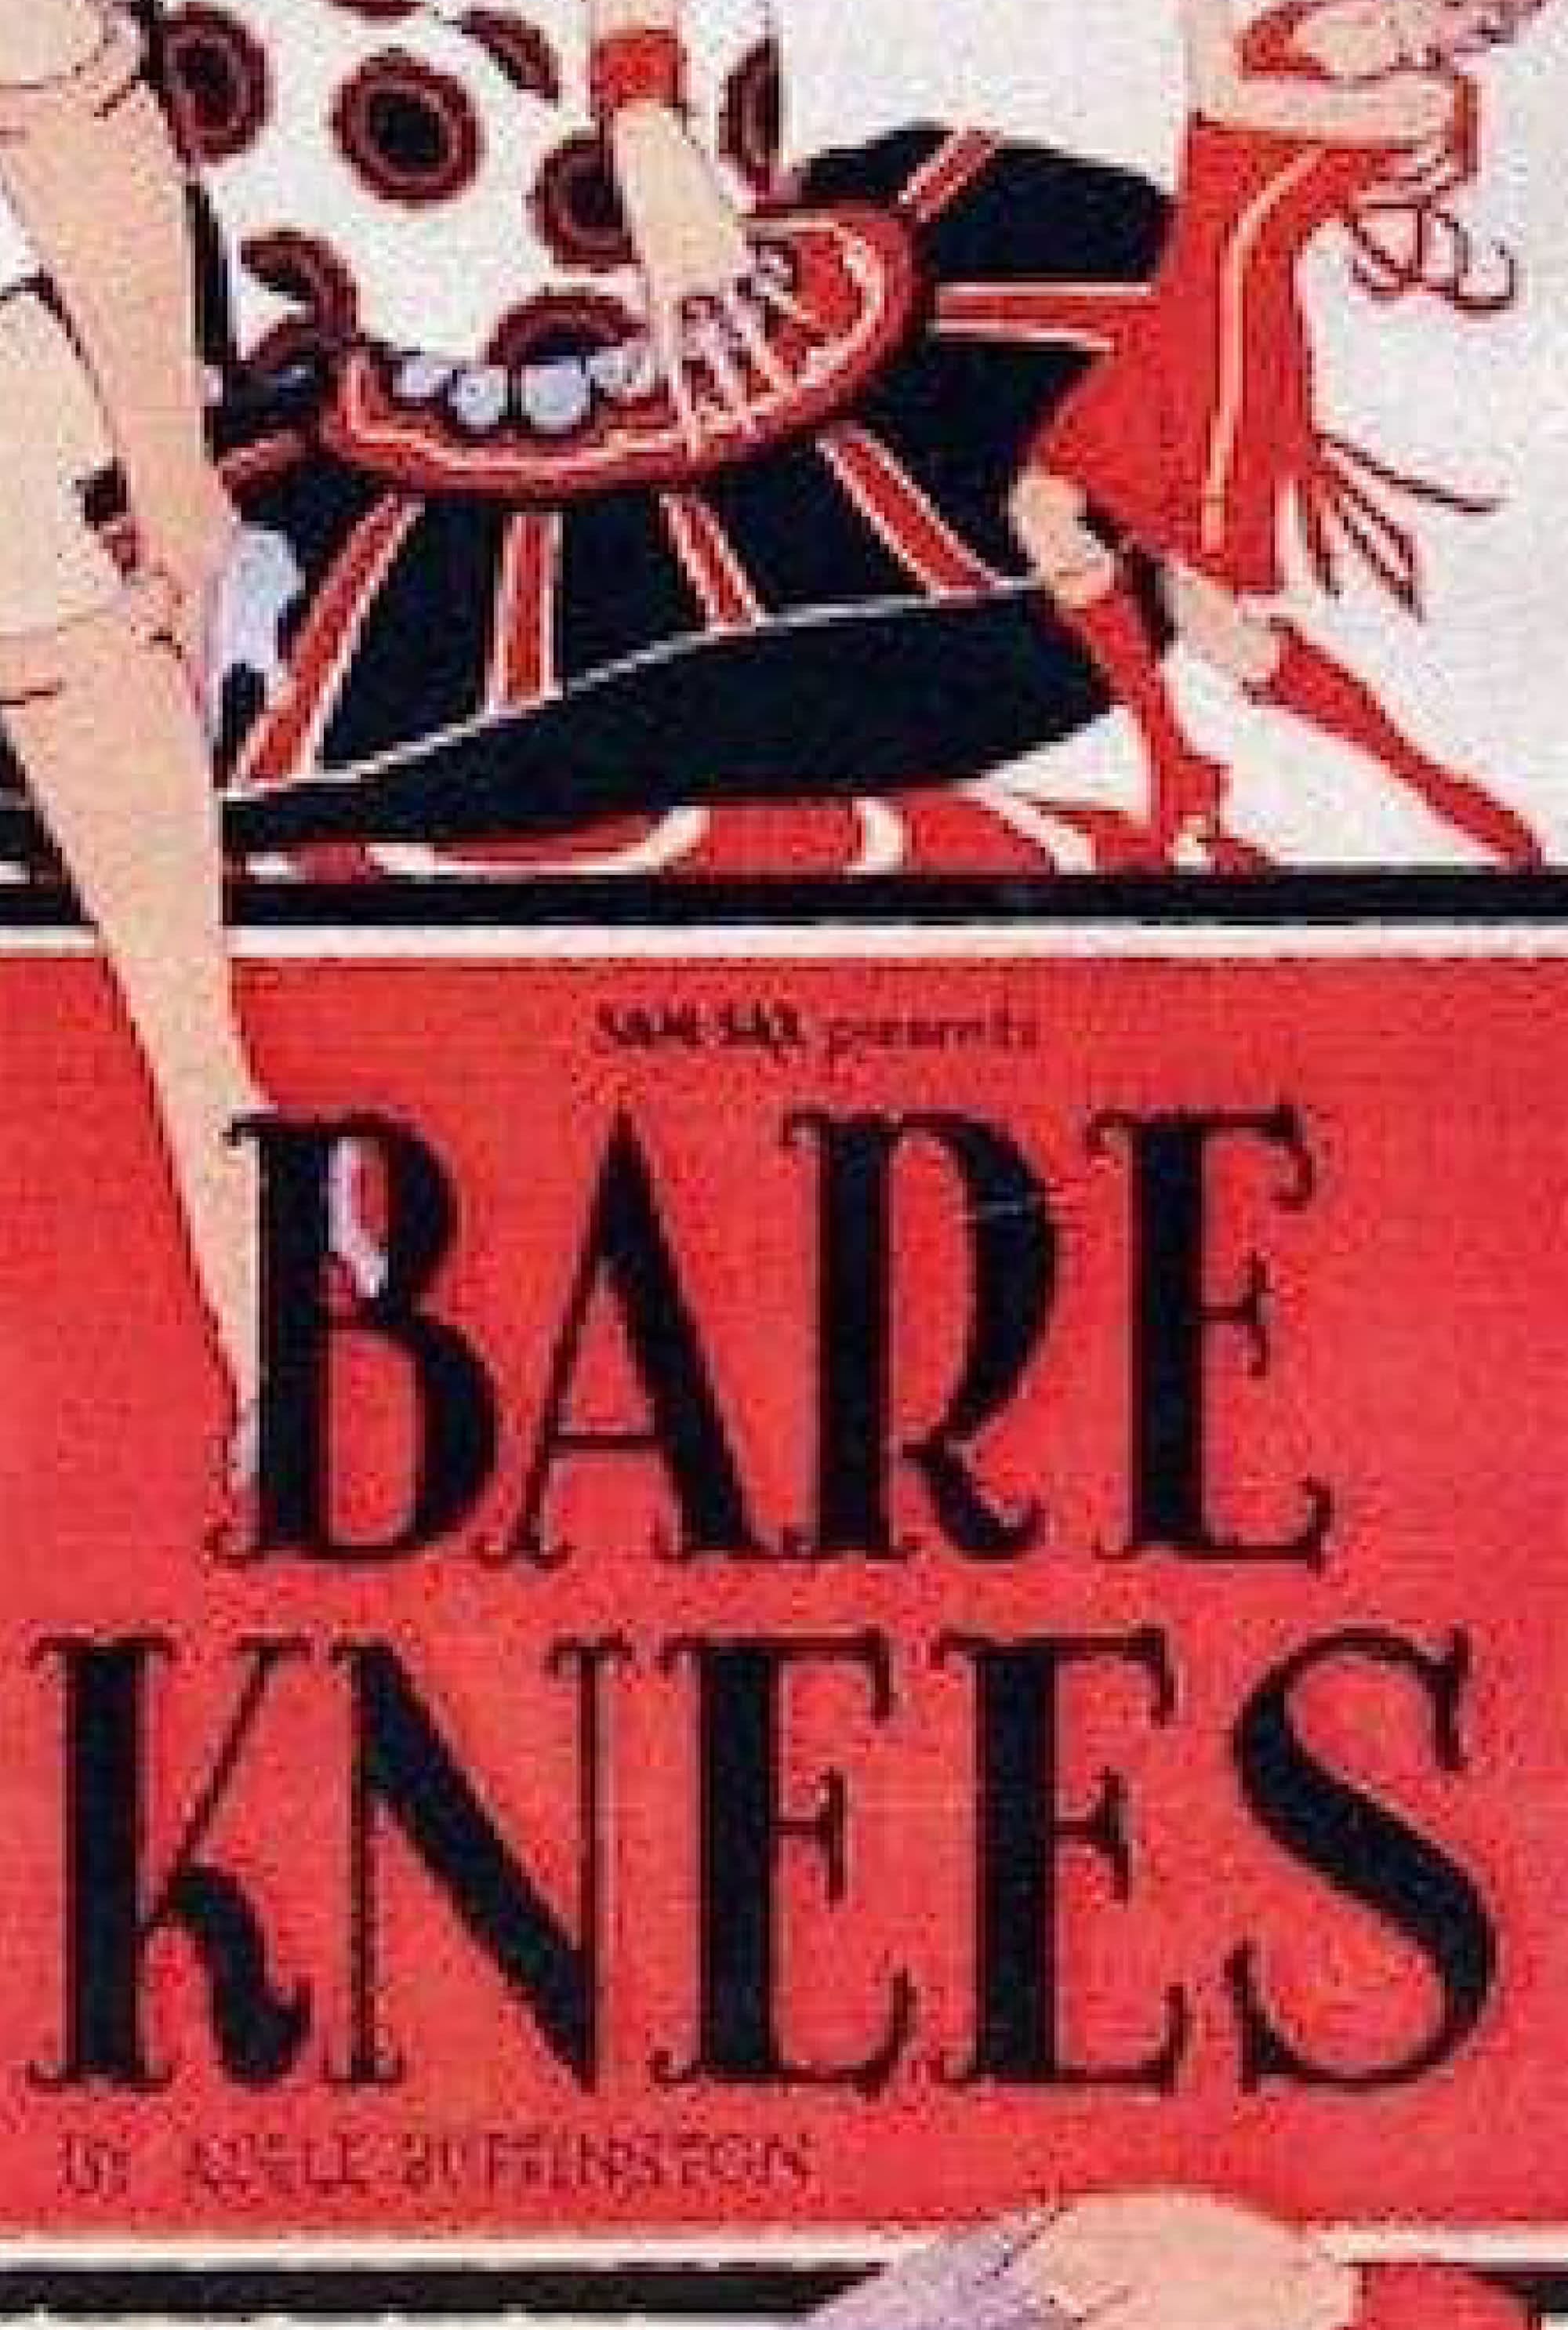 Atlas Presents: Sounds of Silence Film Series: Bare Knees - 1928 in Washington, DC